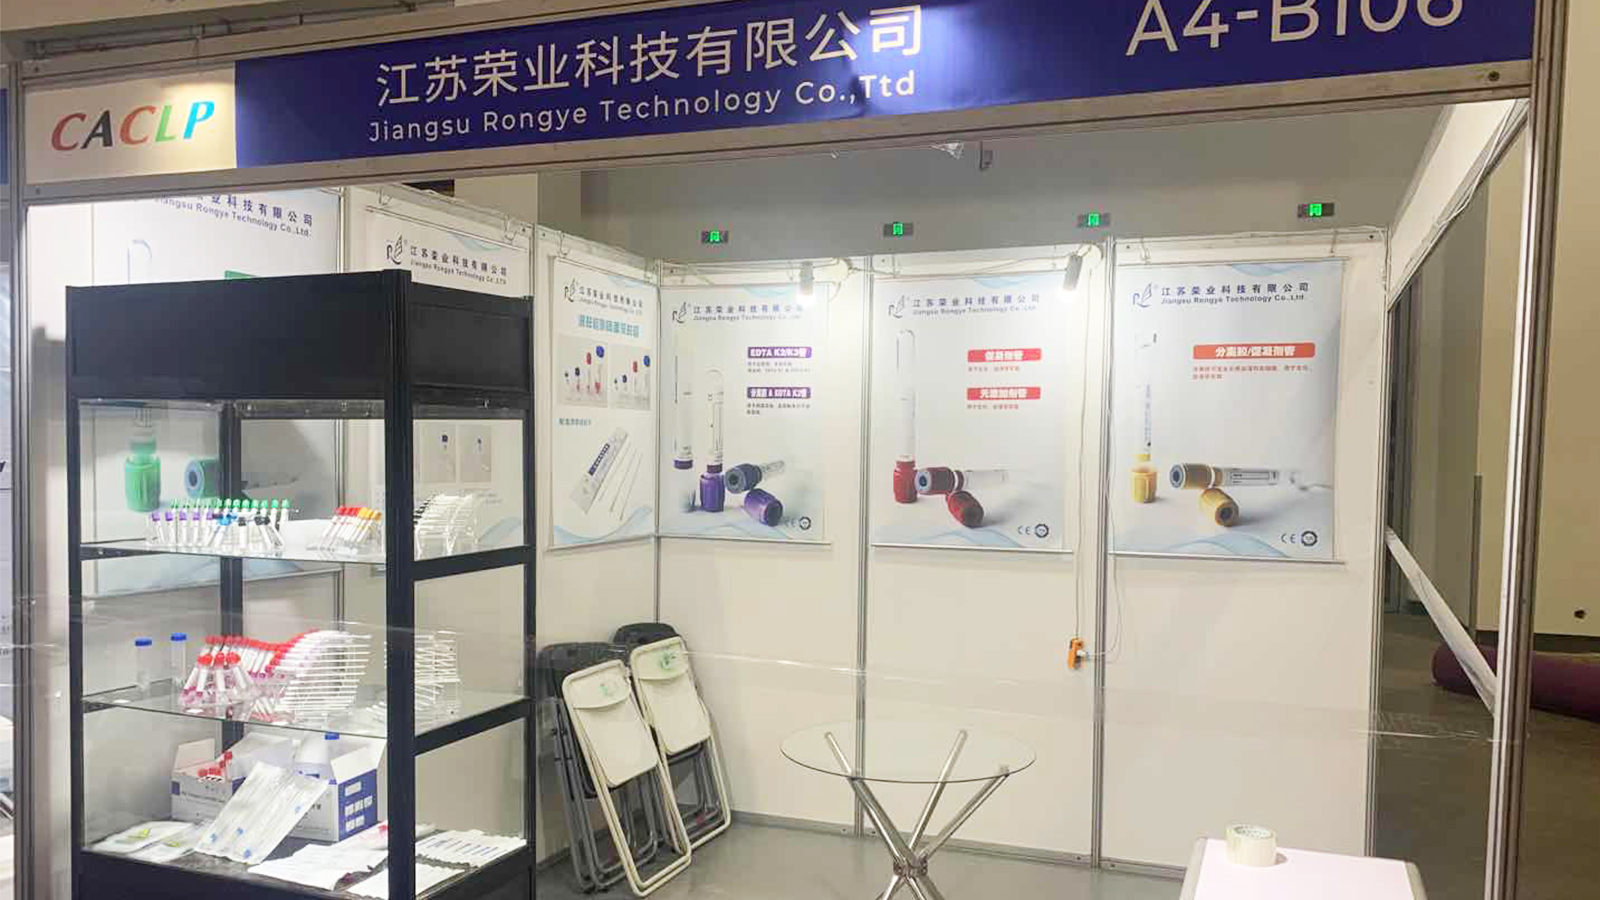 2021 China (Shanghai) International Medical Equipment Exhibition CMEF ended successfully